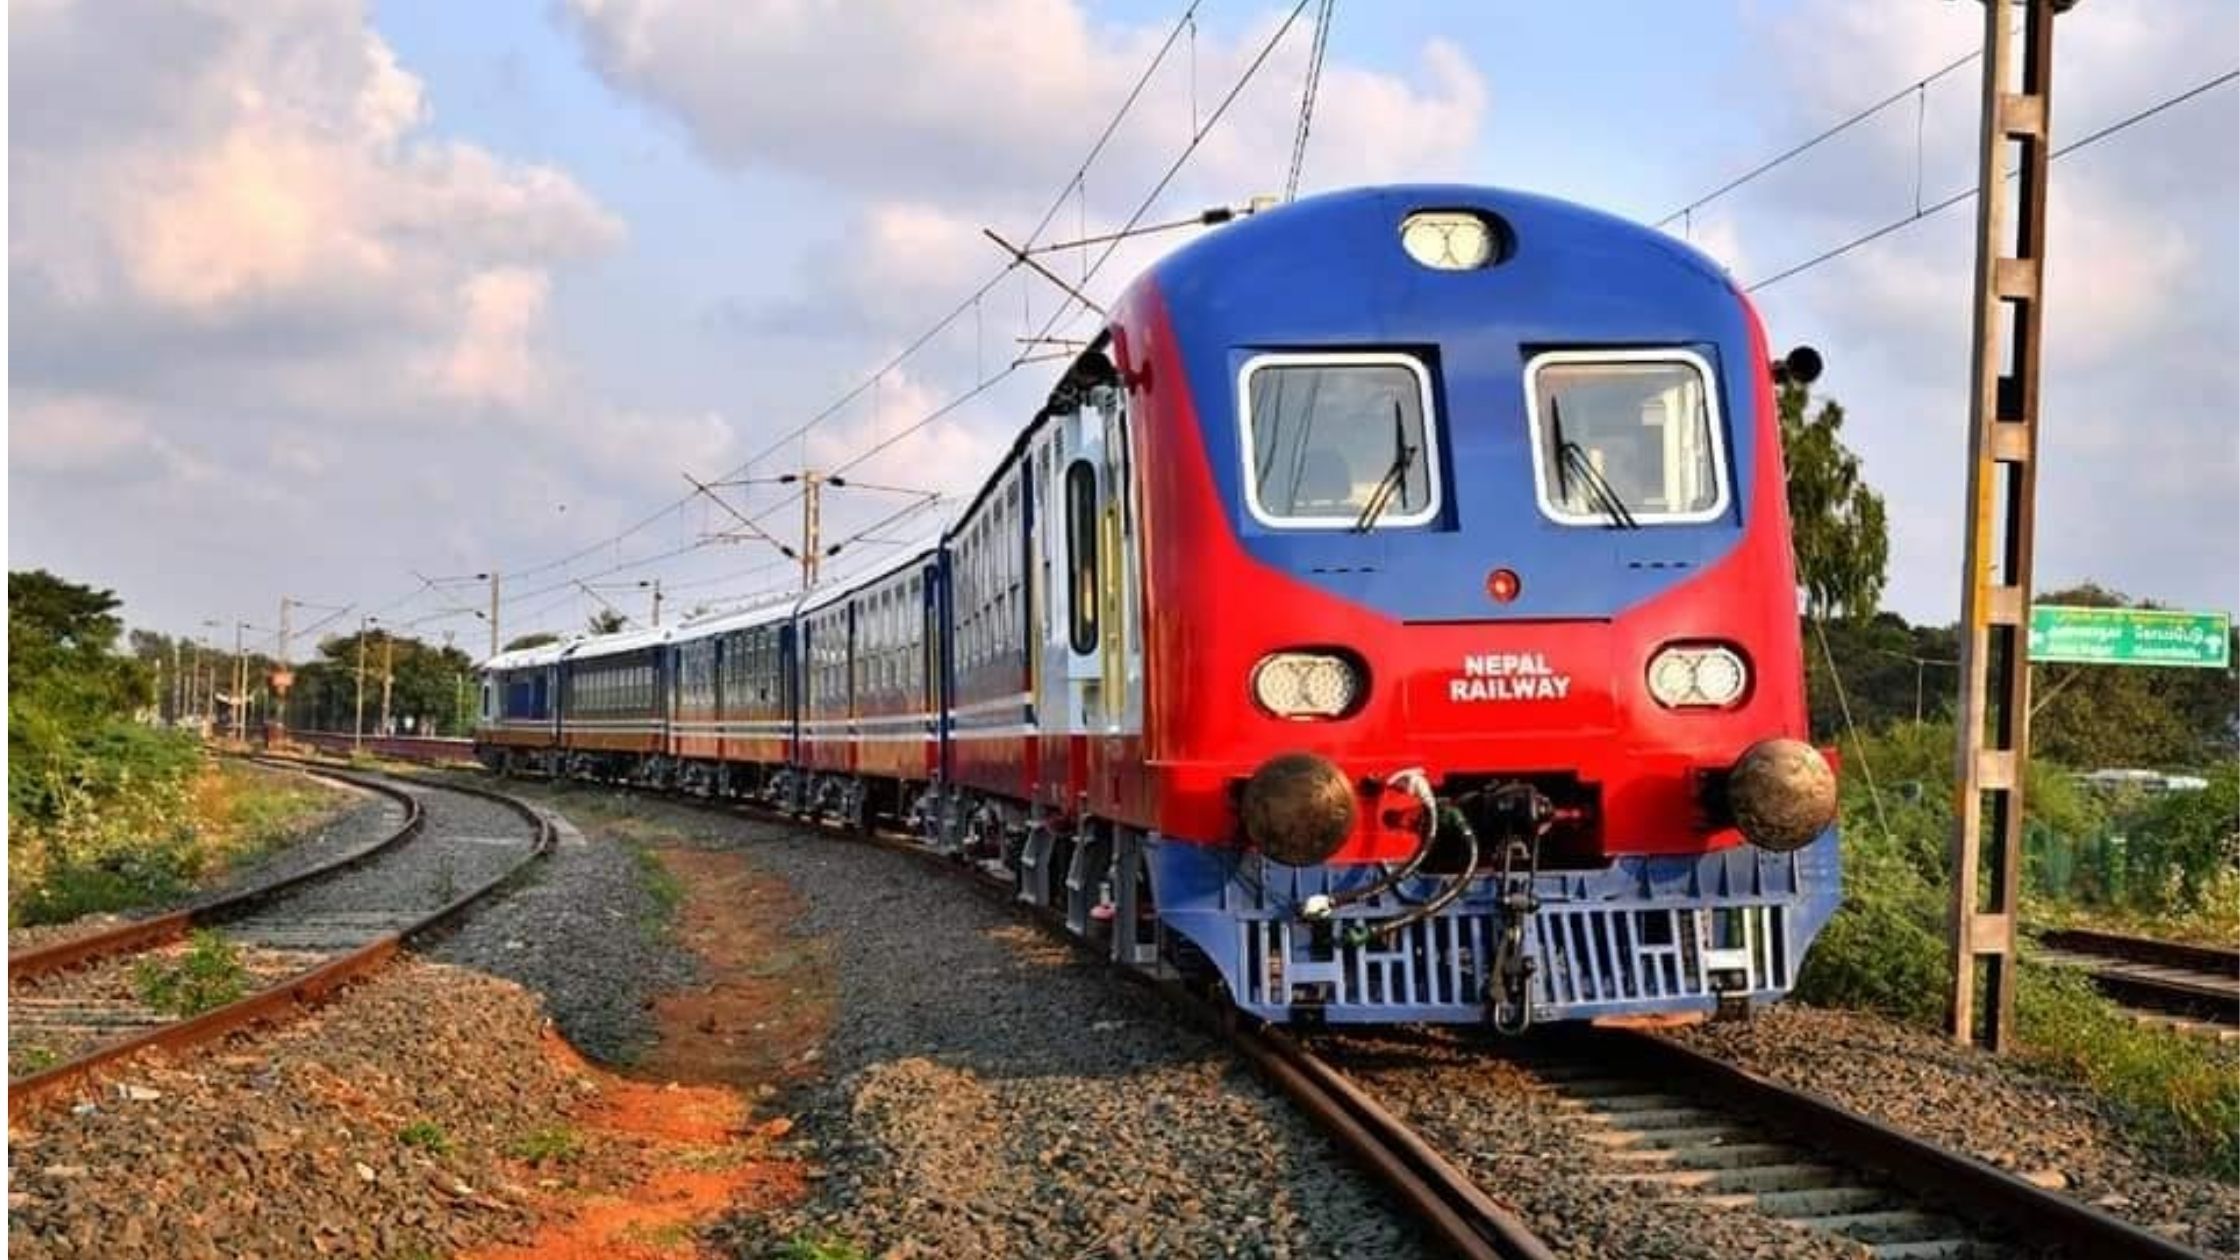 Train service between India and Nepal will be restored from April 2